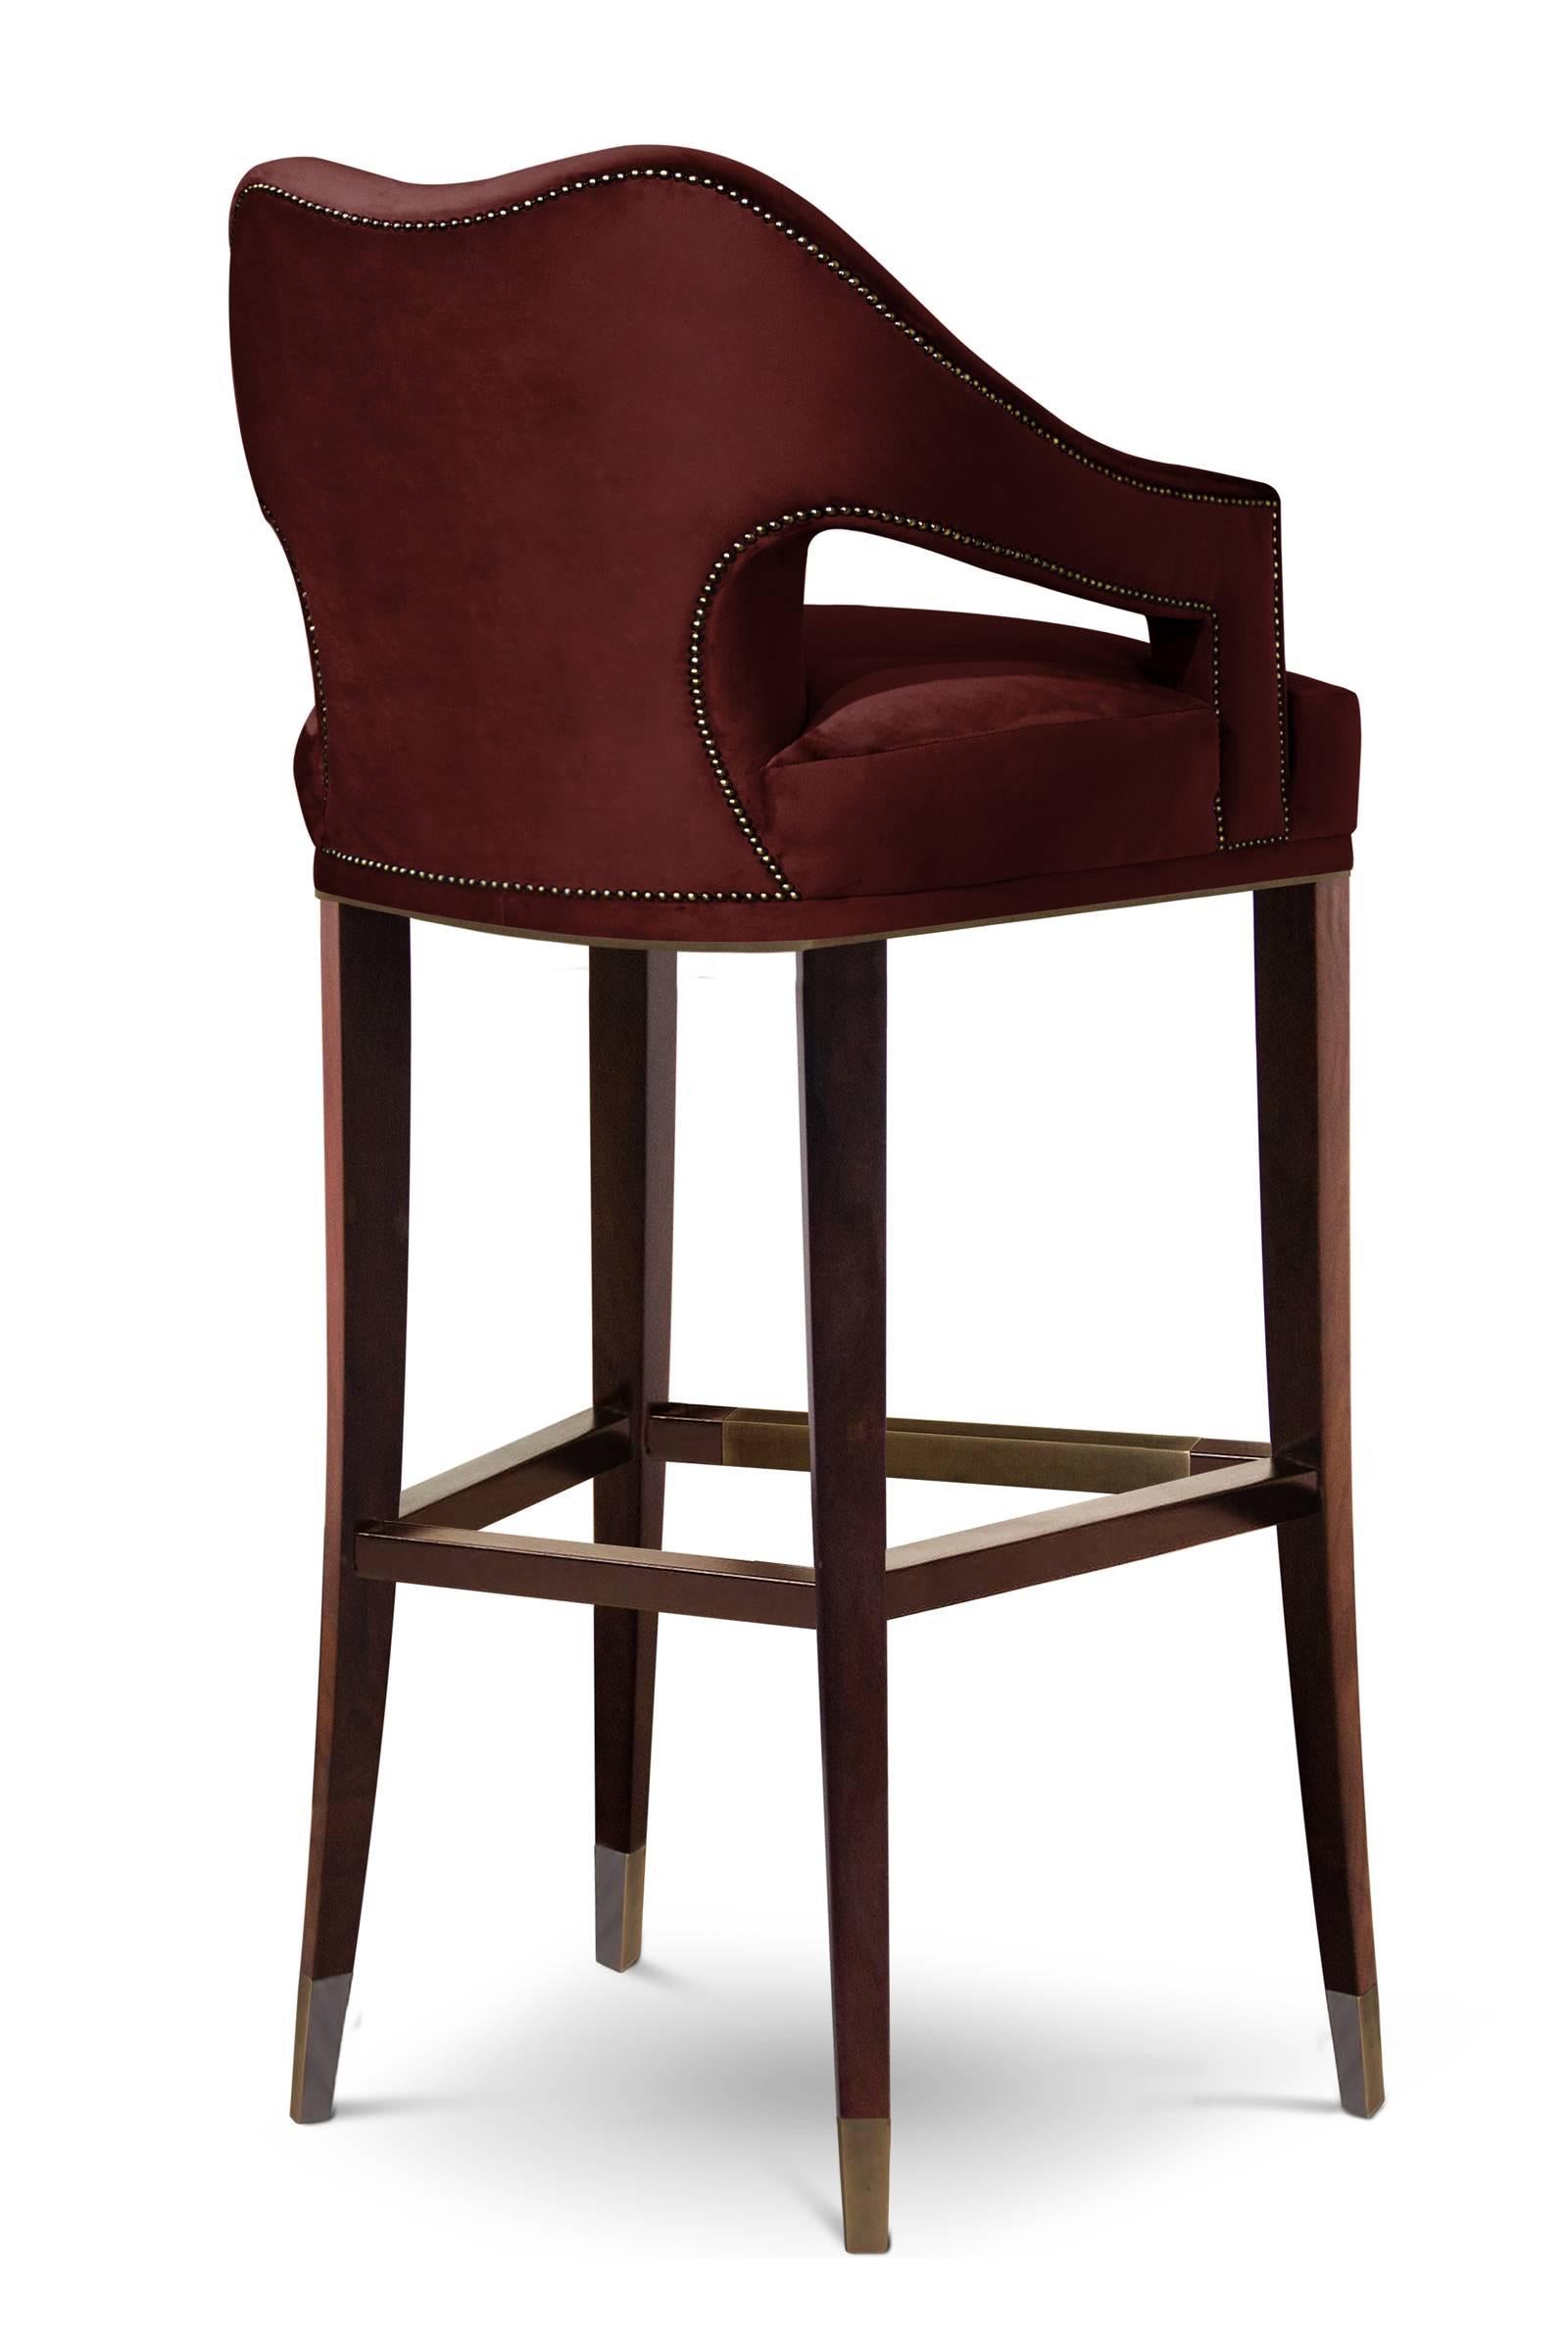 Bar stool Twenty made upholstered and covered with deep
red cotton velvet fabric.
Structure in solid ash wood with walnut stained and with aged 
brass details. Nails in bronze Renaissance finish.
Also available with other fabrics colors, on request.
